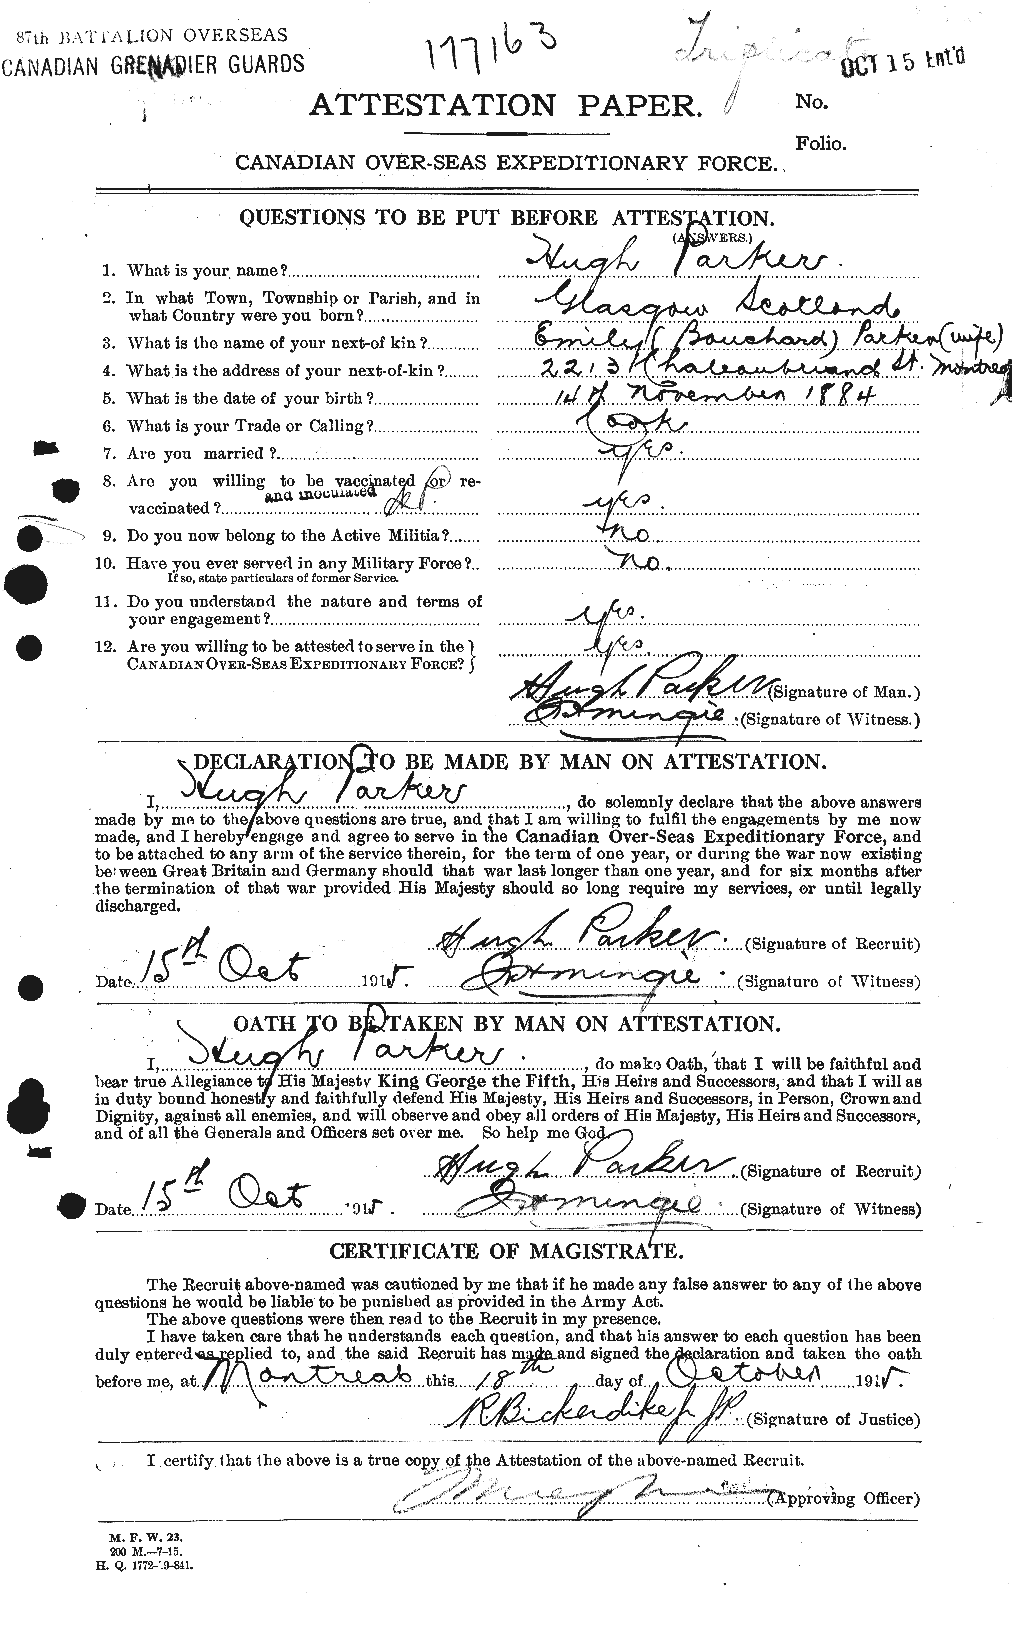 Personnel Records of the First World War - CEF 565391a